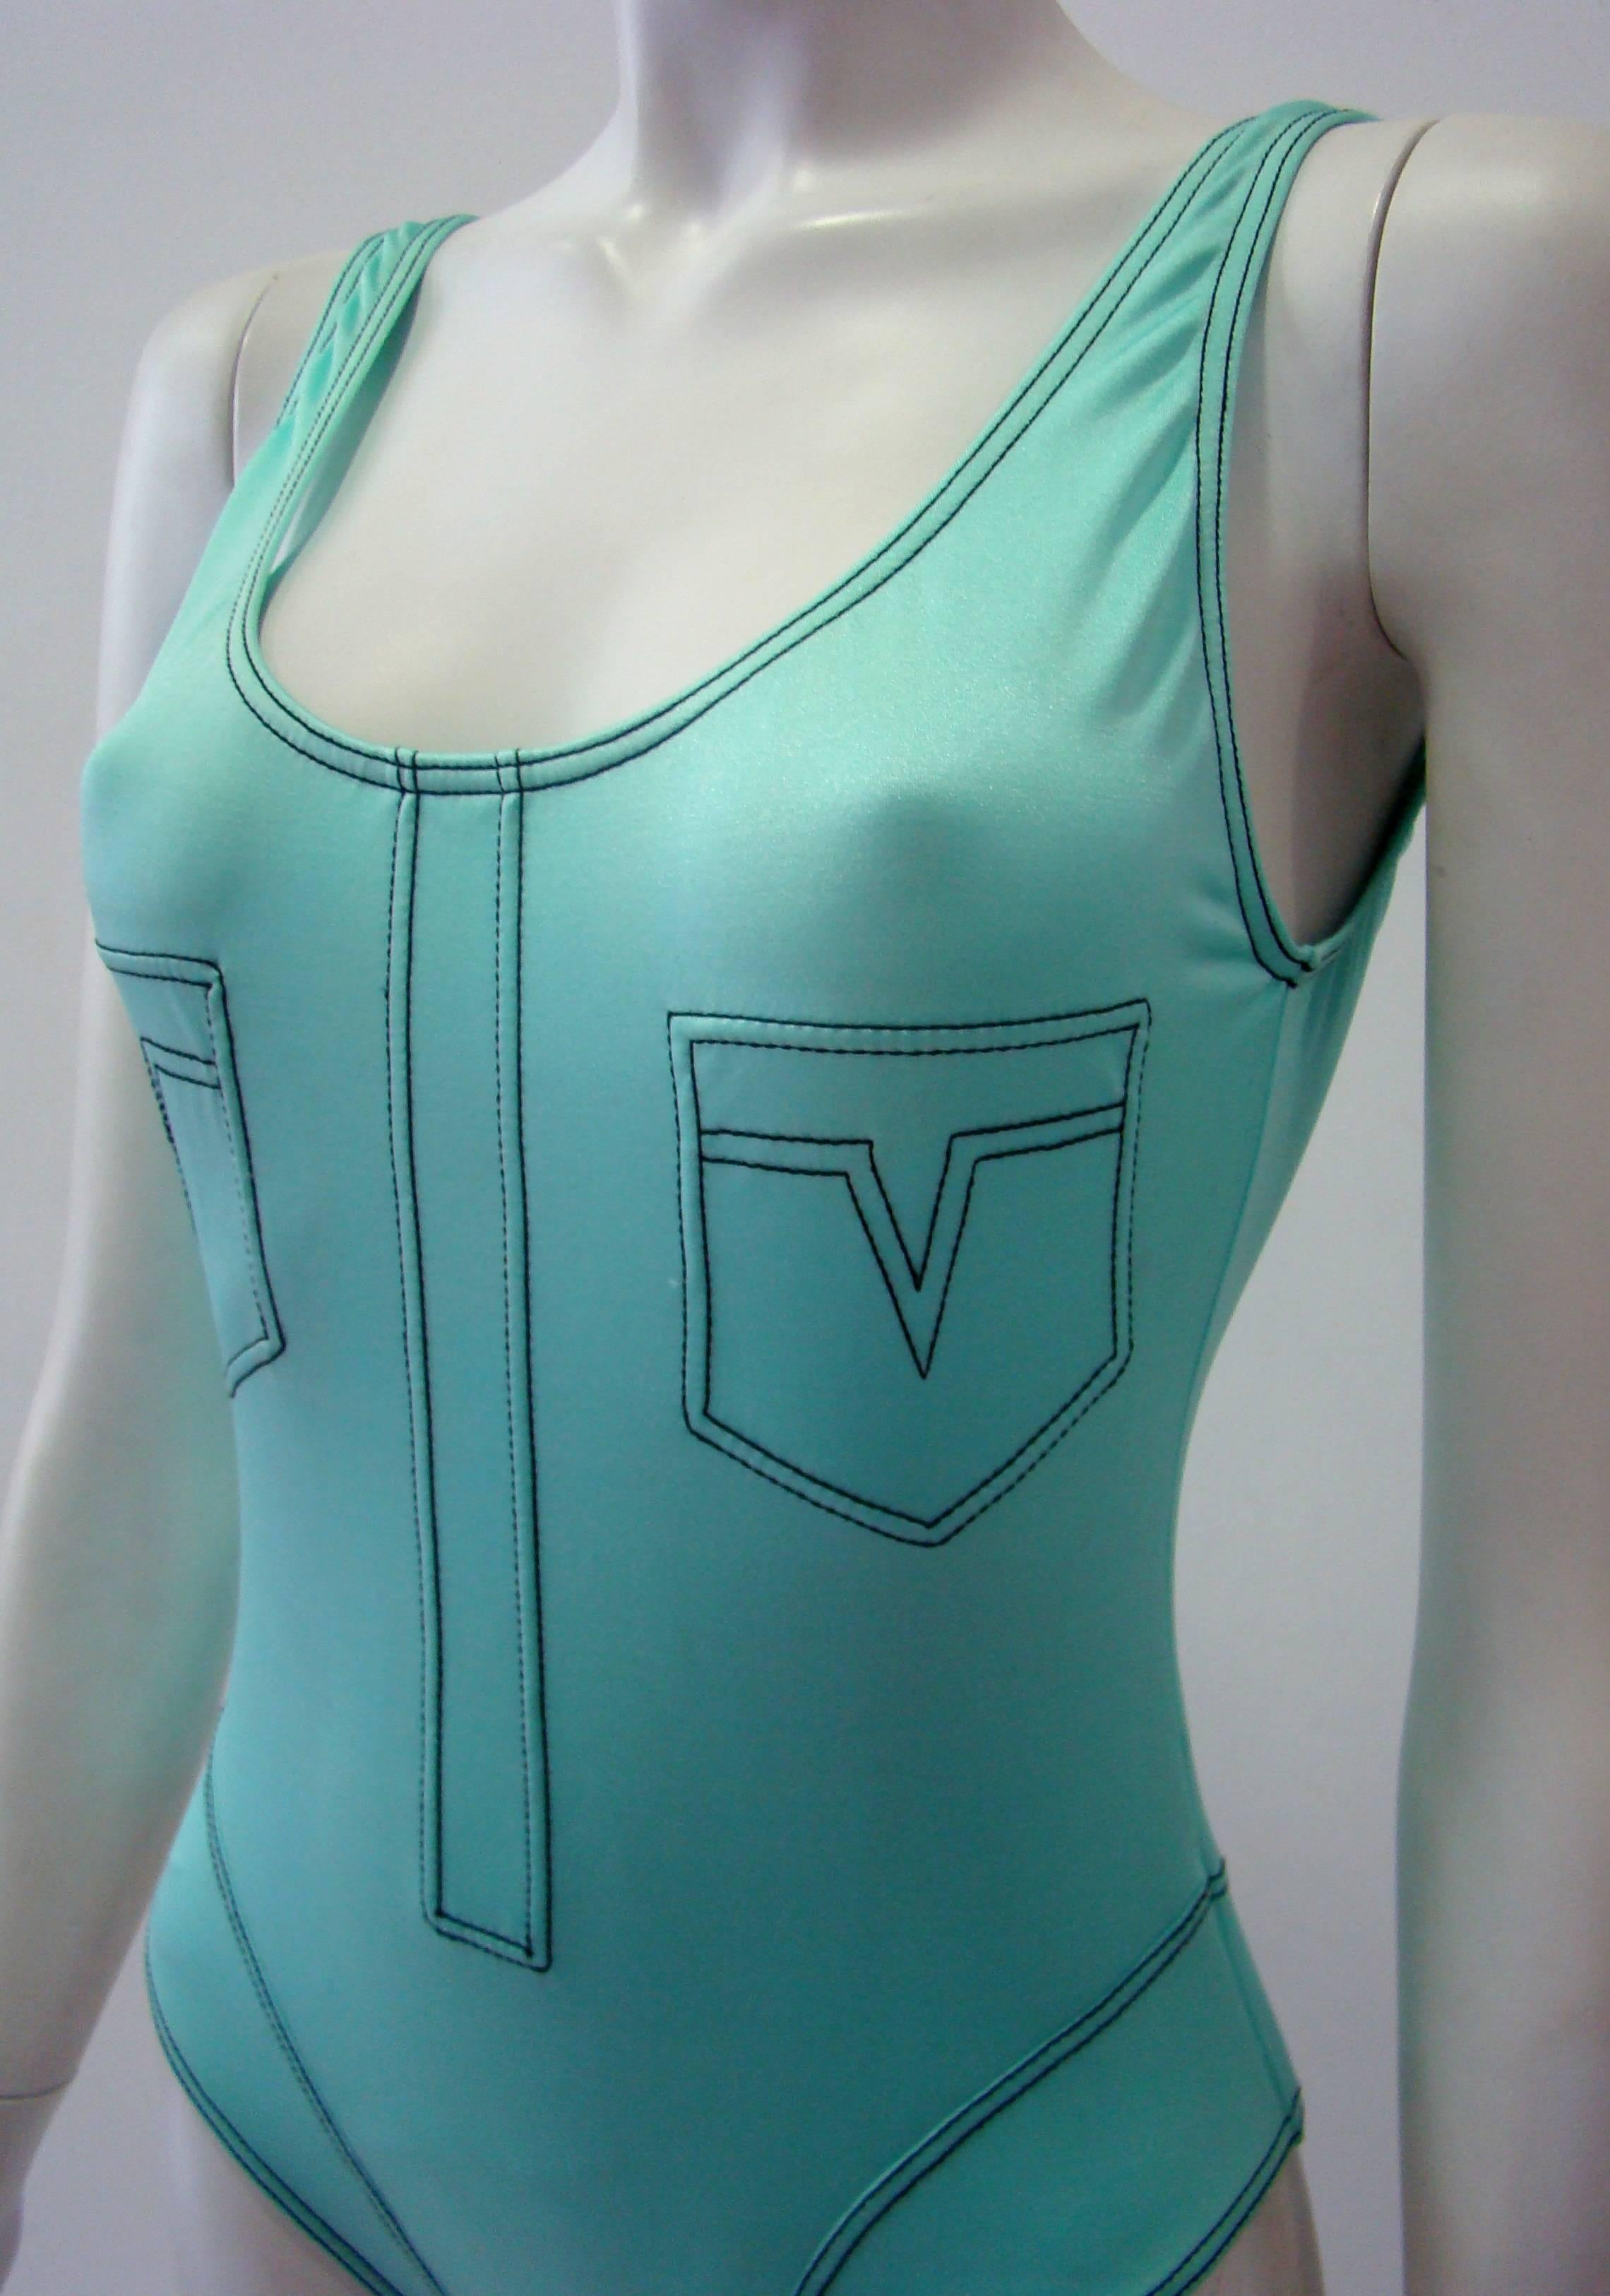 Gianni Versace Mare Stitch Contrast Swimsuit In Excellent Condition For Sale In Athens, Agia Paraskevi